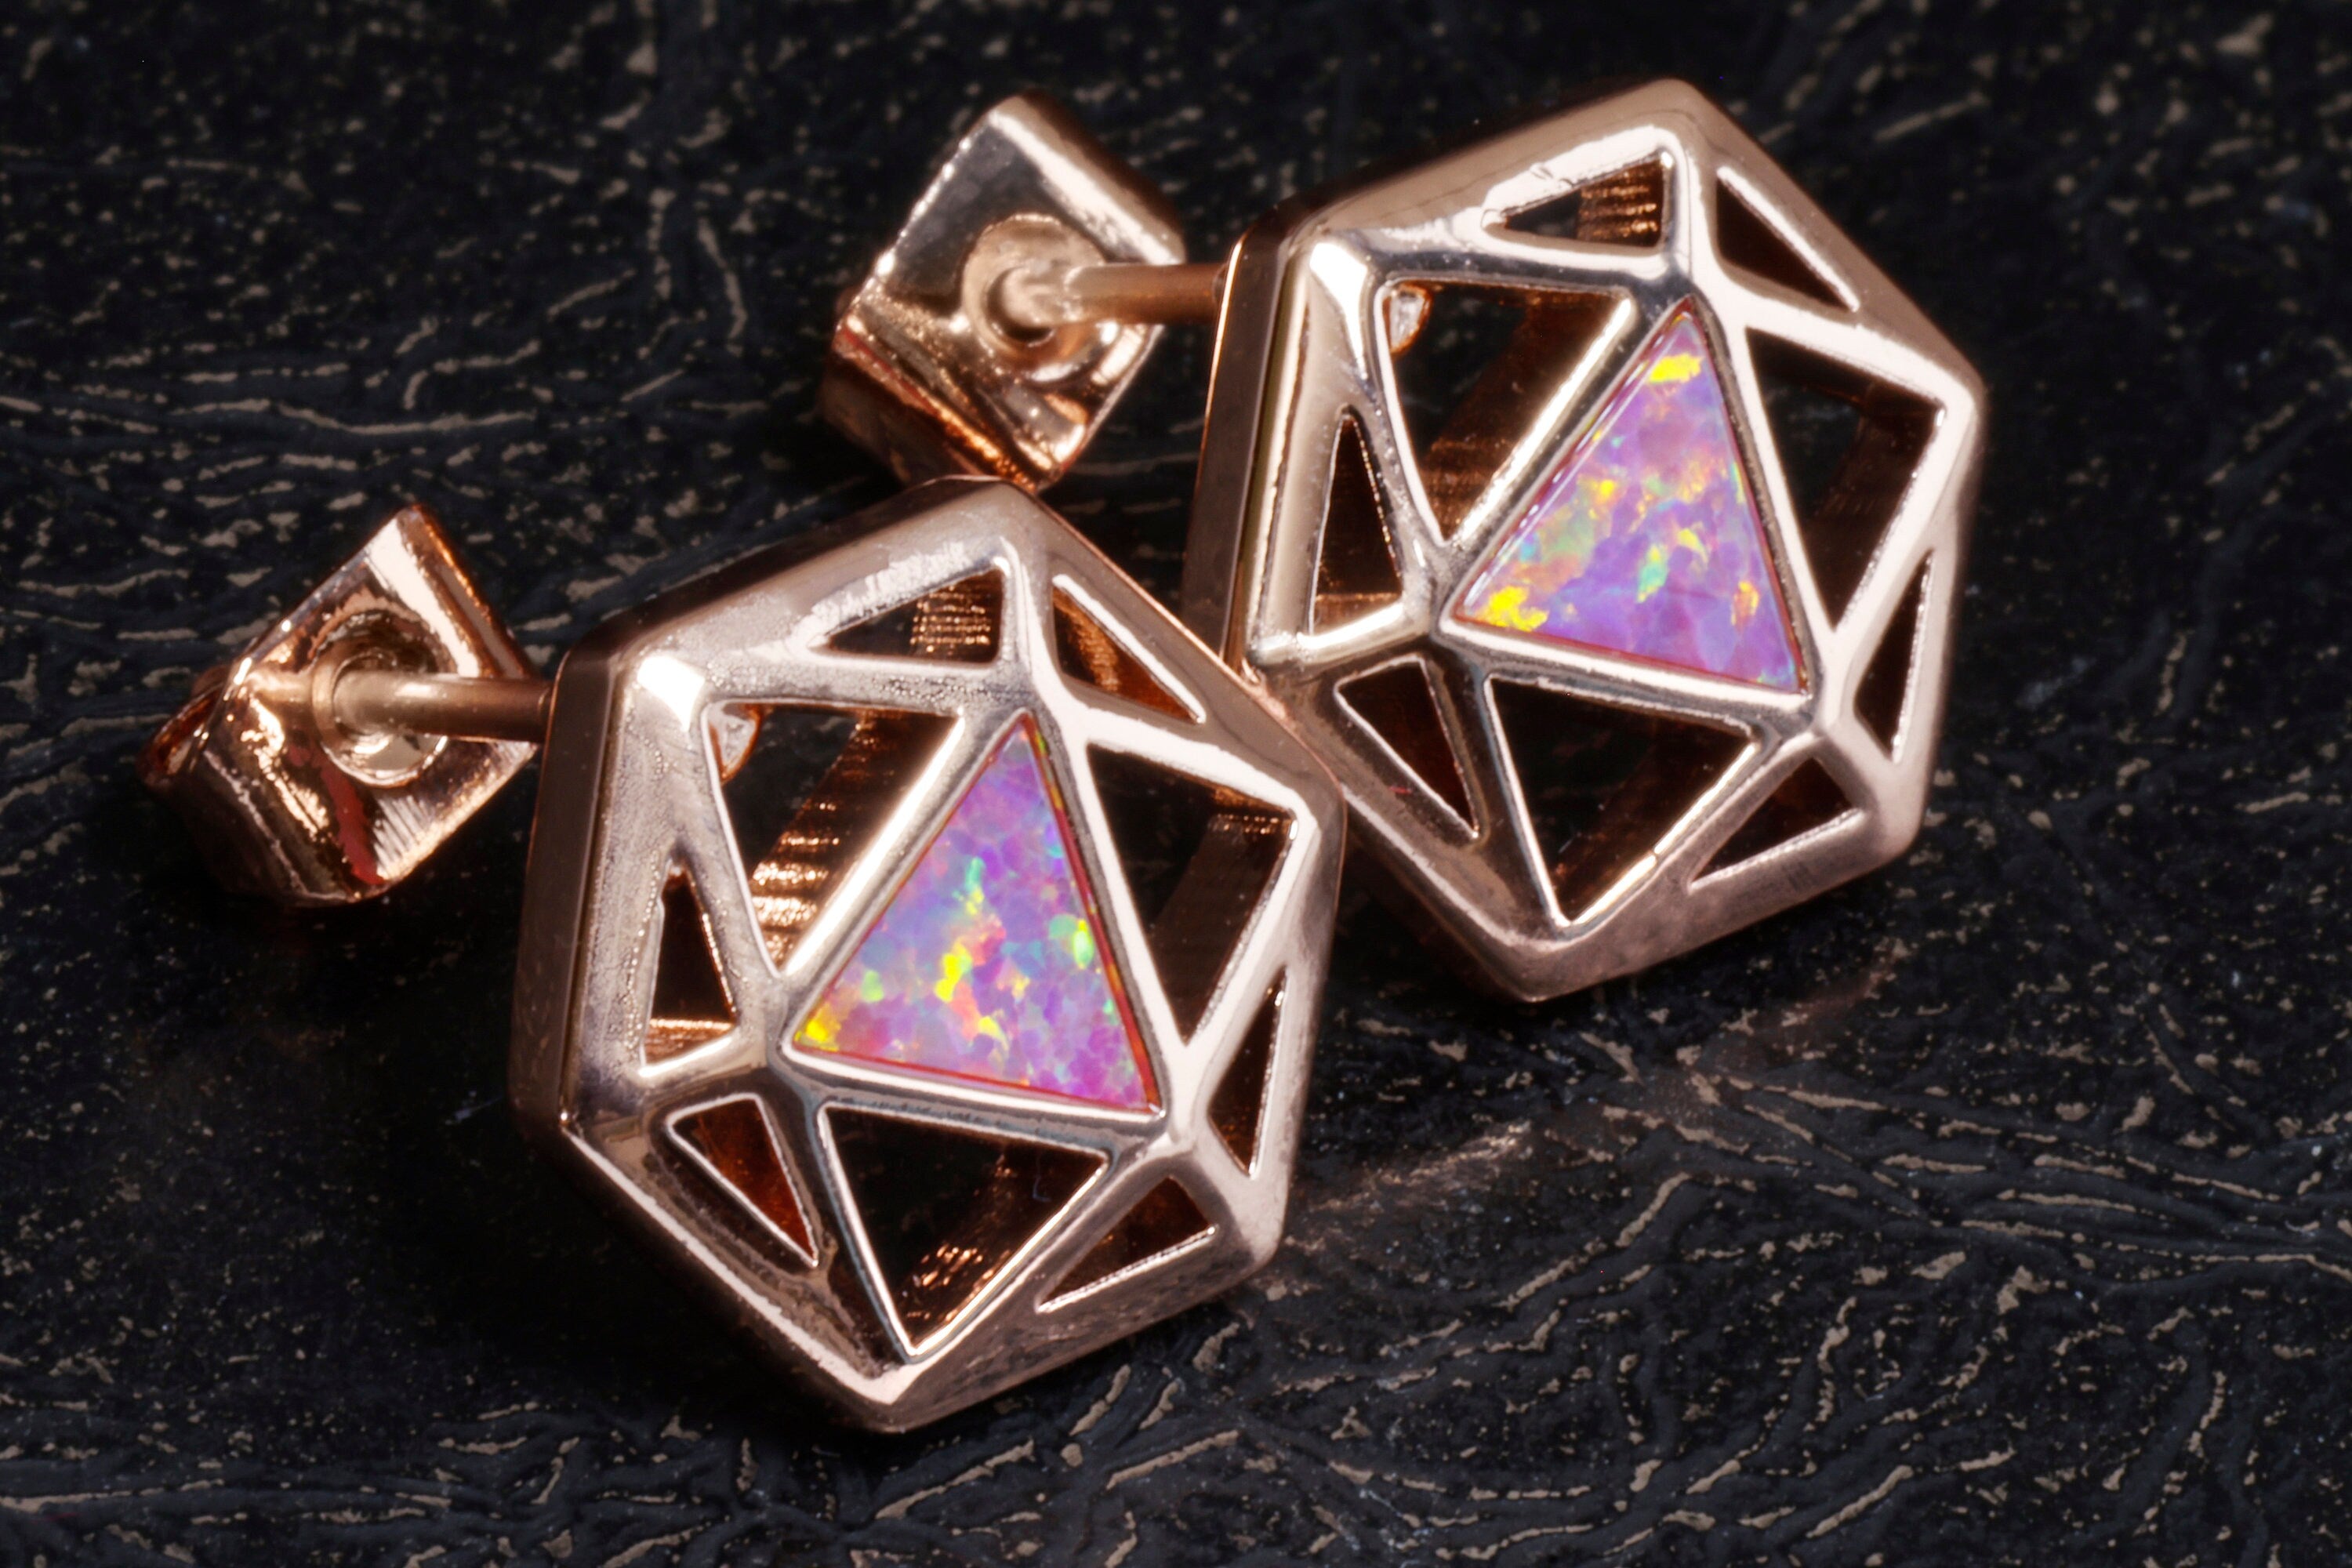 D20 Dice stud earrings, Rose gold dice earrings with light red opal